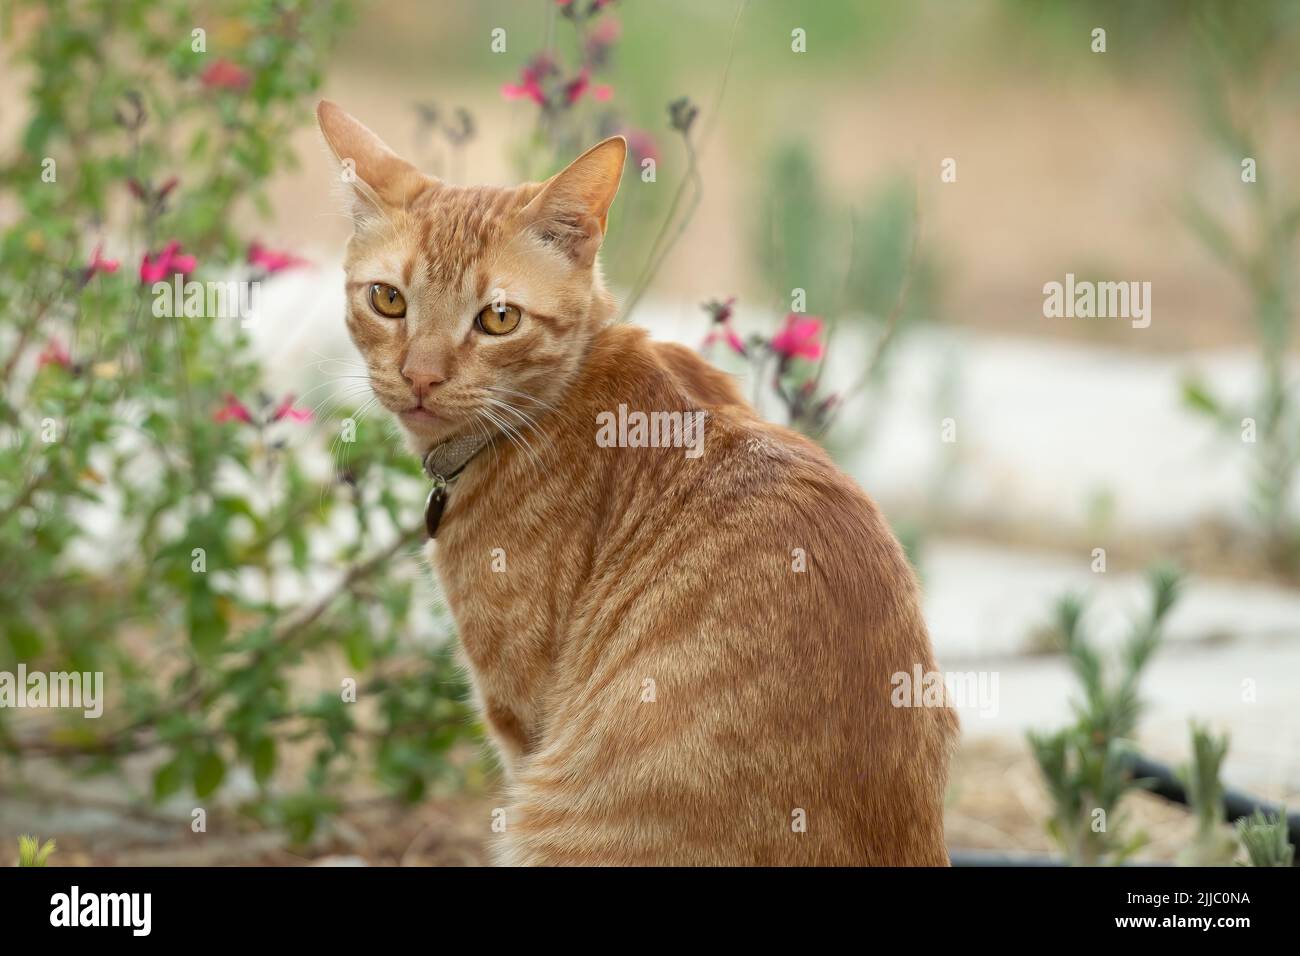 Cat portrait on a spring day with colorful background. Stock Photo